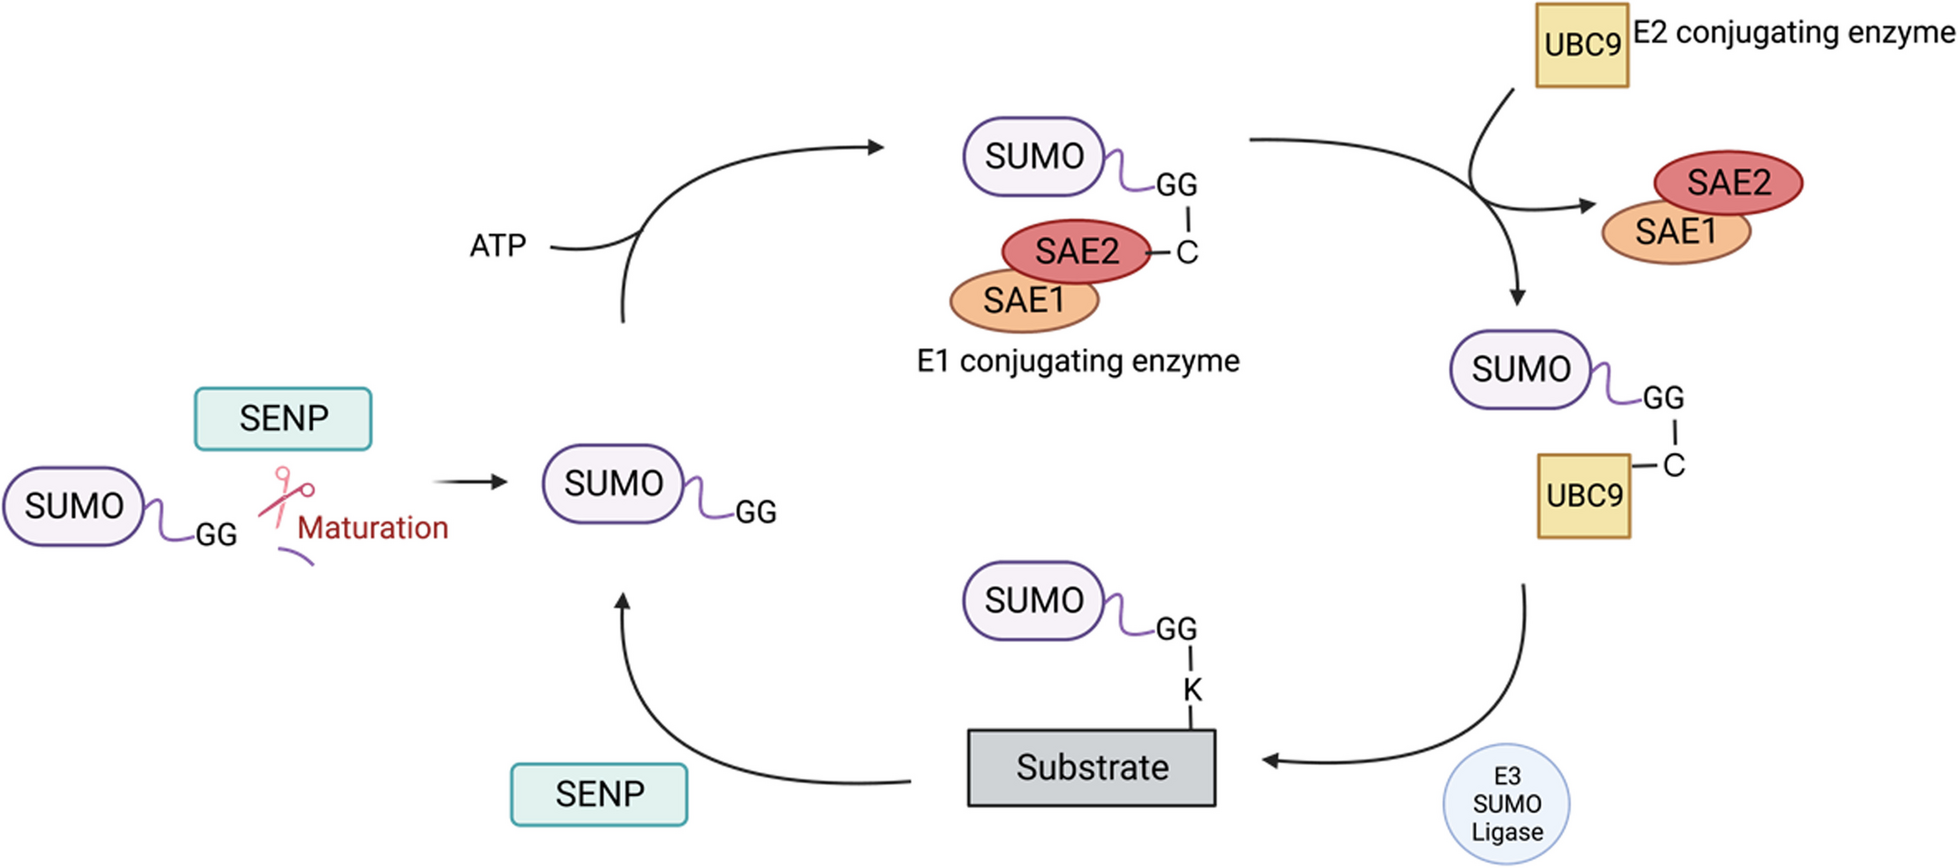 Mechanisms and functions of SUMOylation in health and disease: a review focusing on immune cells